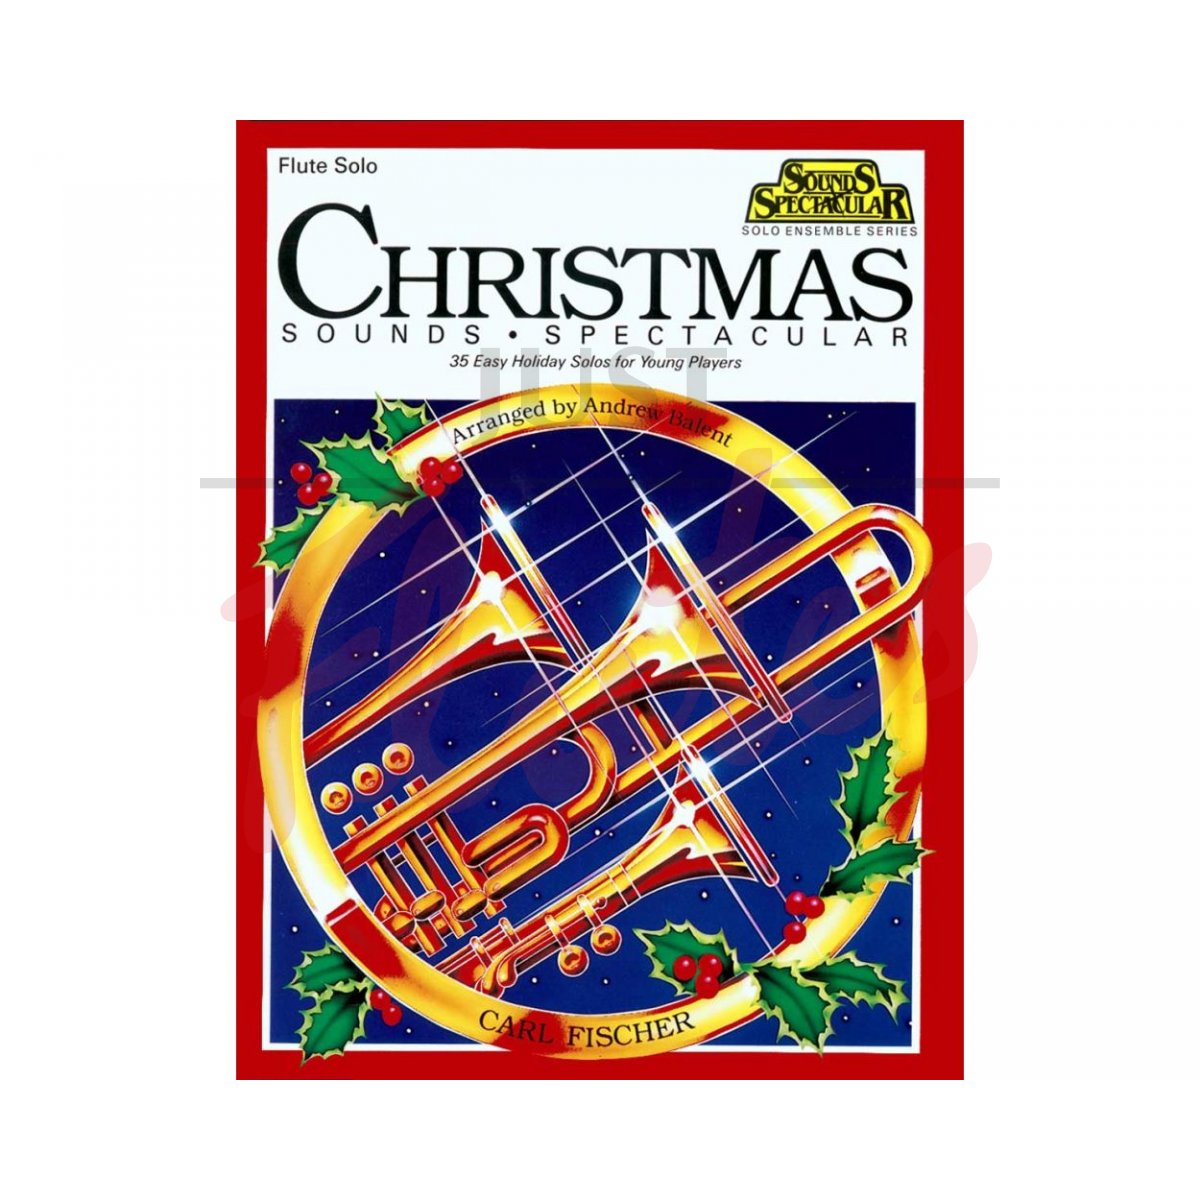 Christmas Sounds Spectacular for Flute